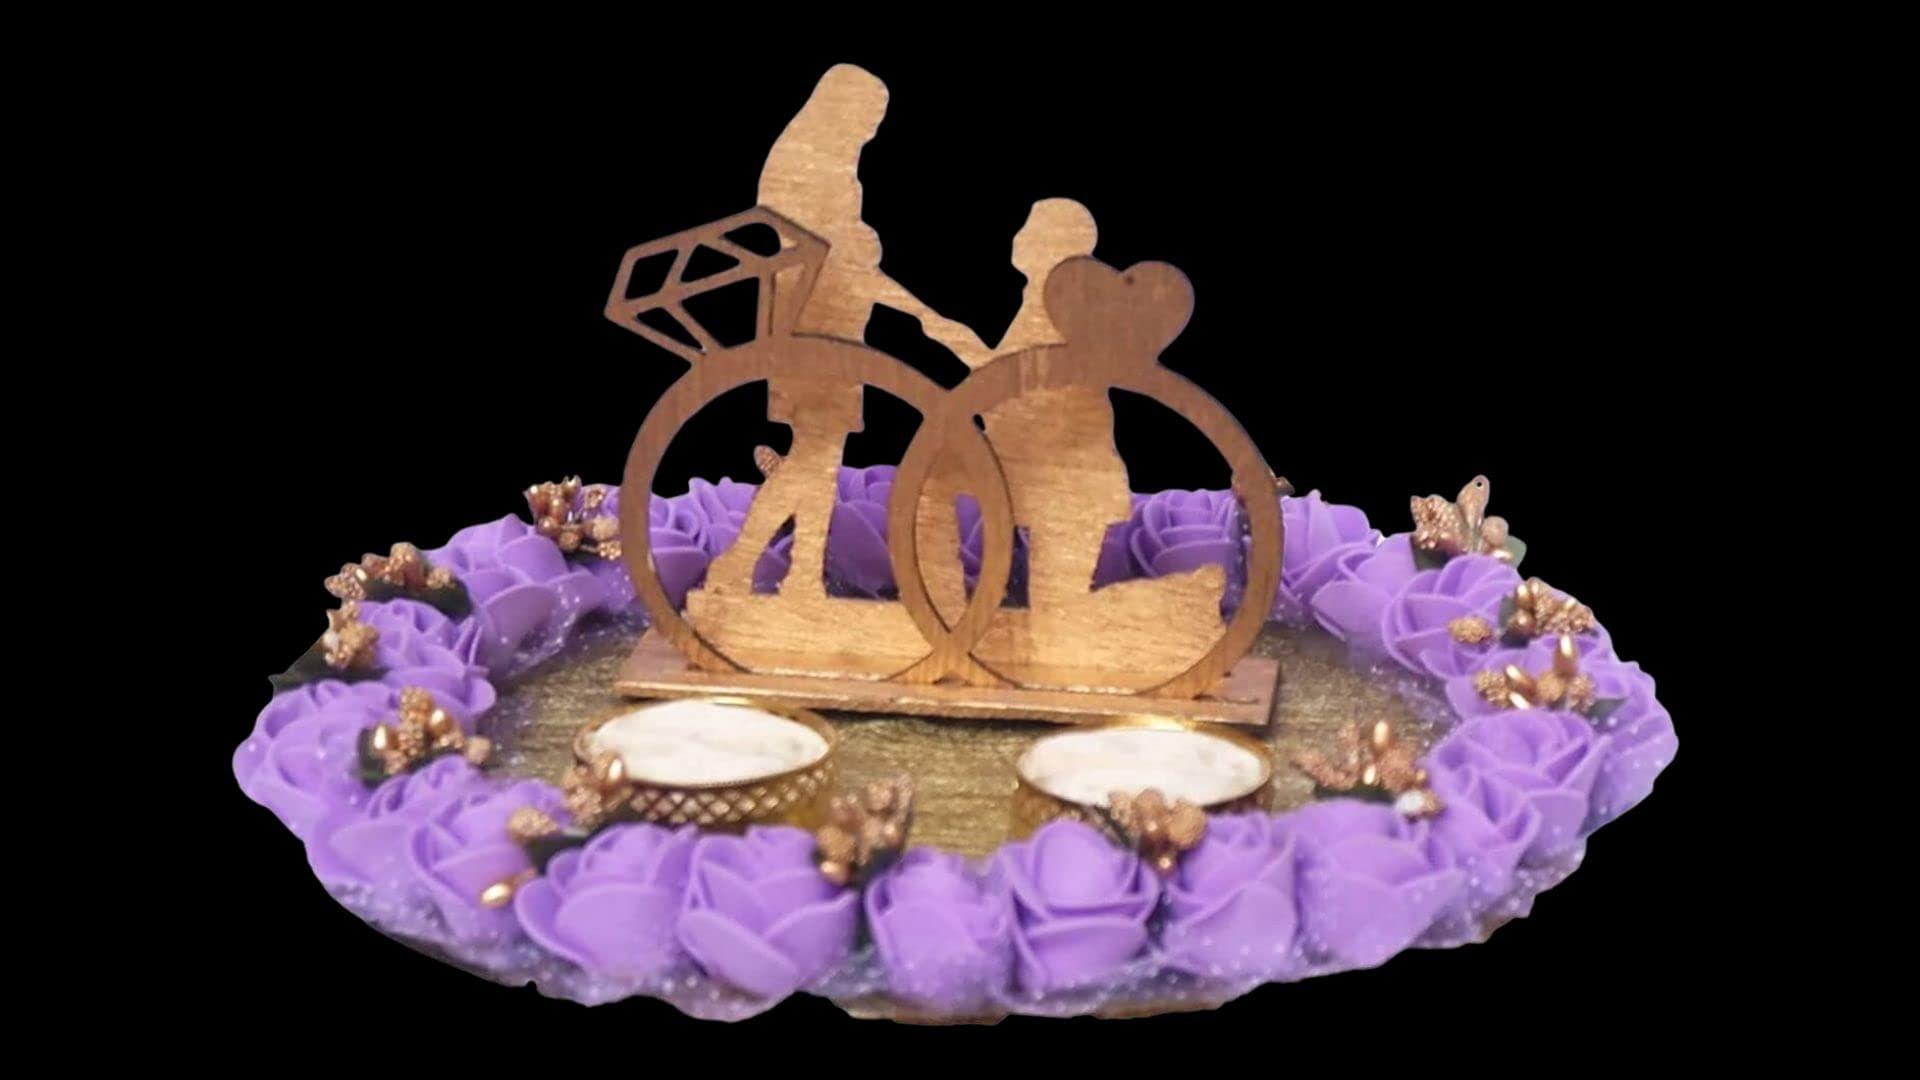 Buy Creative Handicraft Engagement Ring Platter,Ring Platter,Decorative  Tray,Handmade Rose Plate,Ring Ceremony,Rakhi Plate,nikkah Plate Mirror,New  Designs (Wood) Online at Low Prices in India - Amazon.in